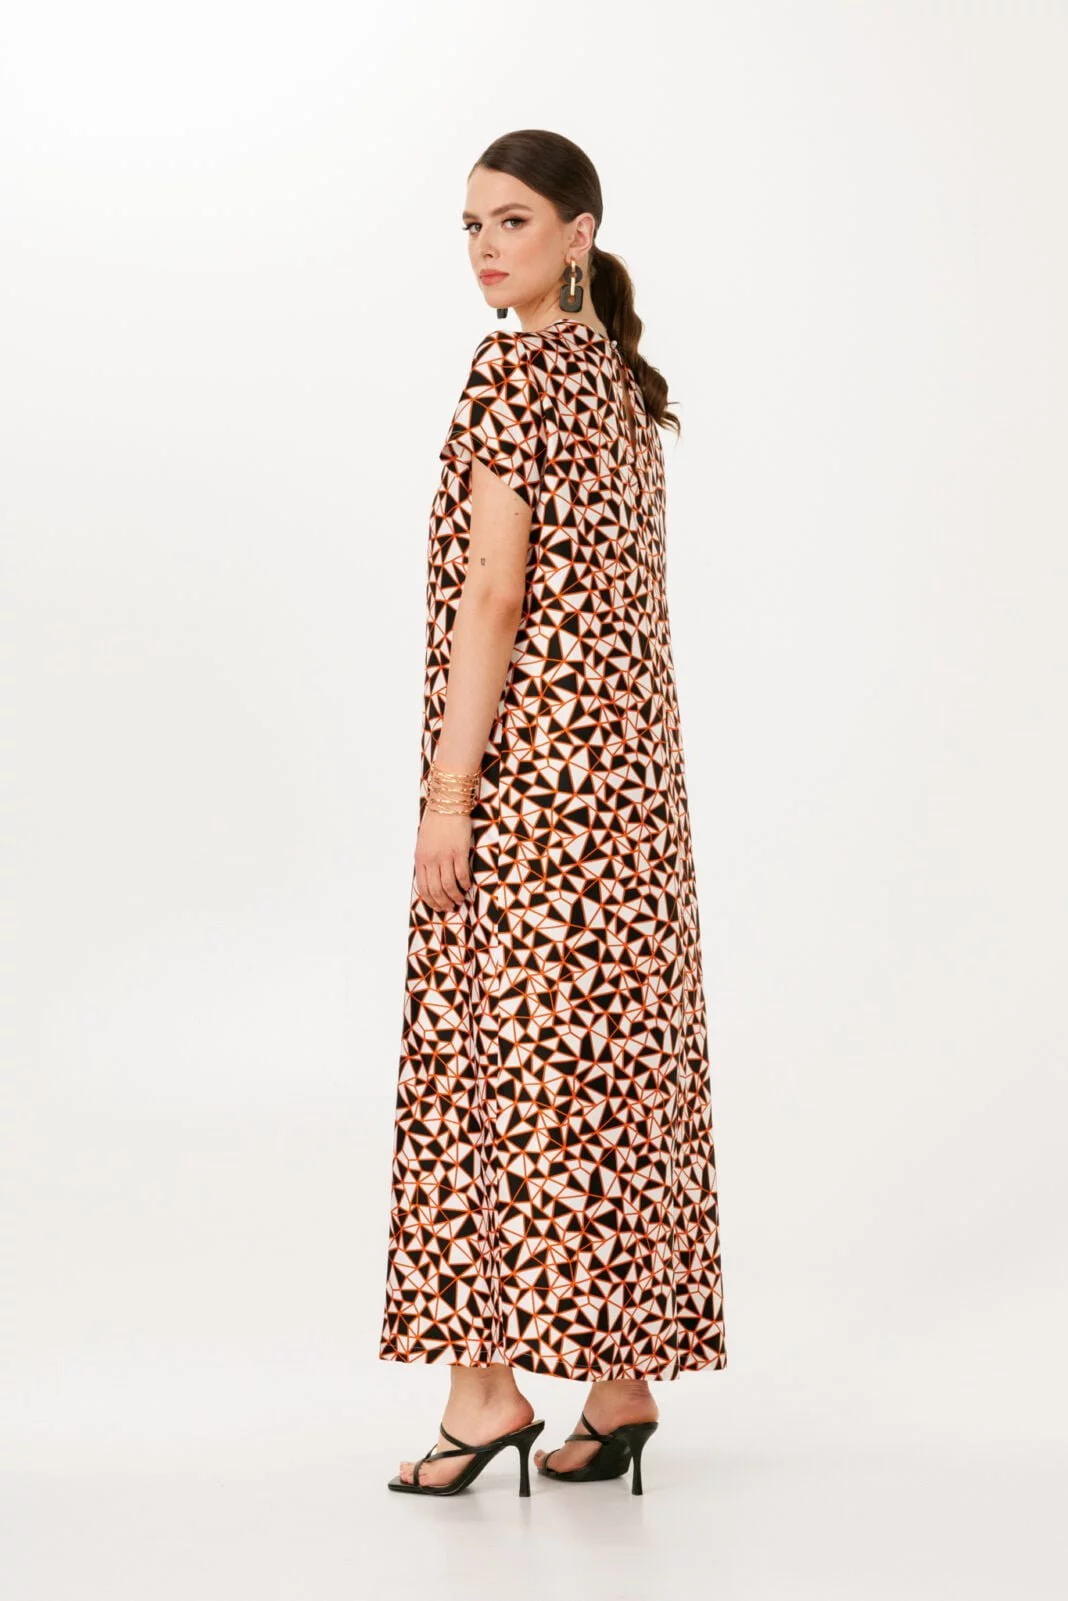 Elegant Maxi Dress - Warm Earthy Tones, Short Sleeves, Geometric Print for Luxurious Beach Parties and Wedding Guests